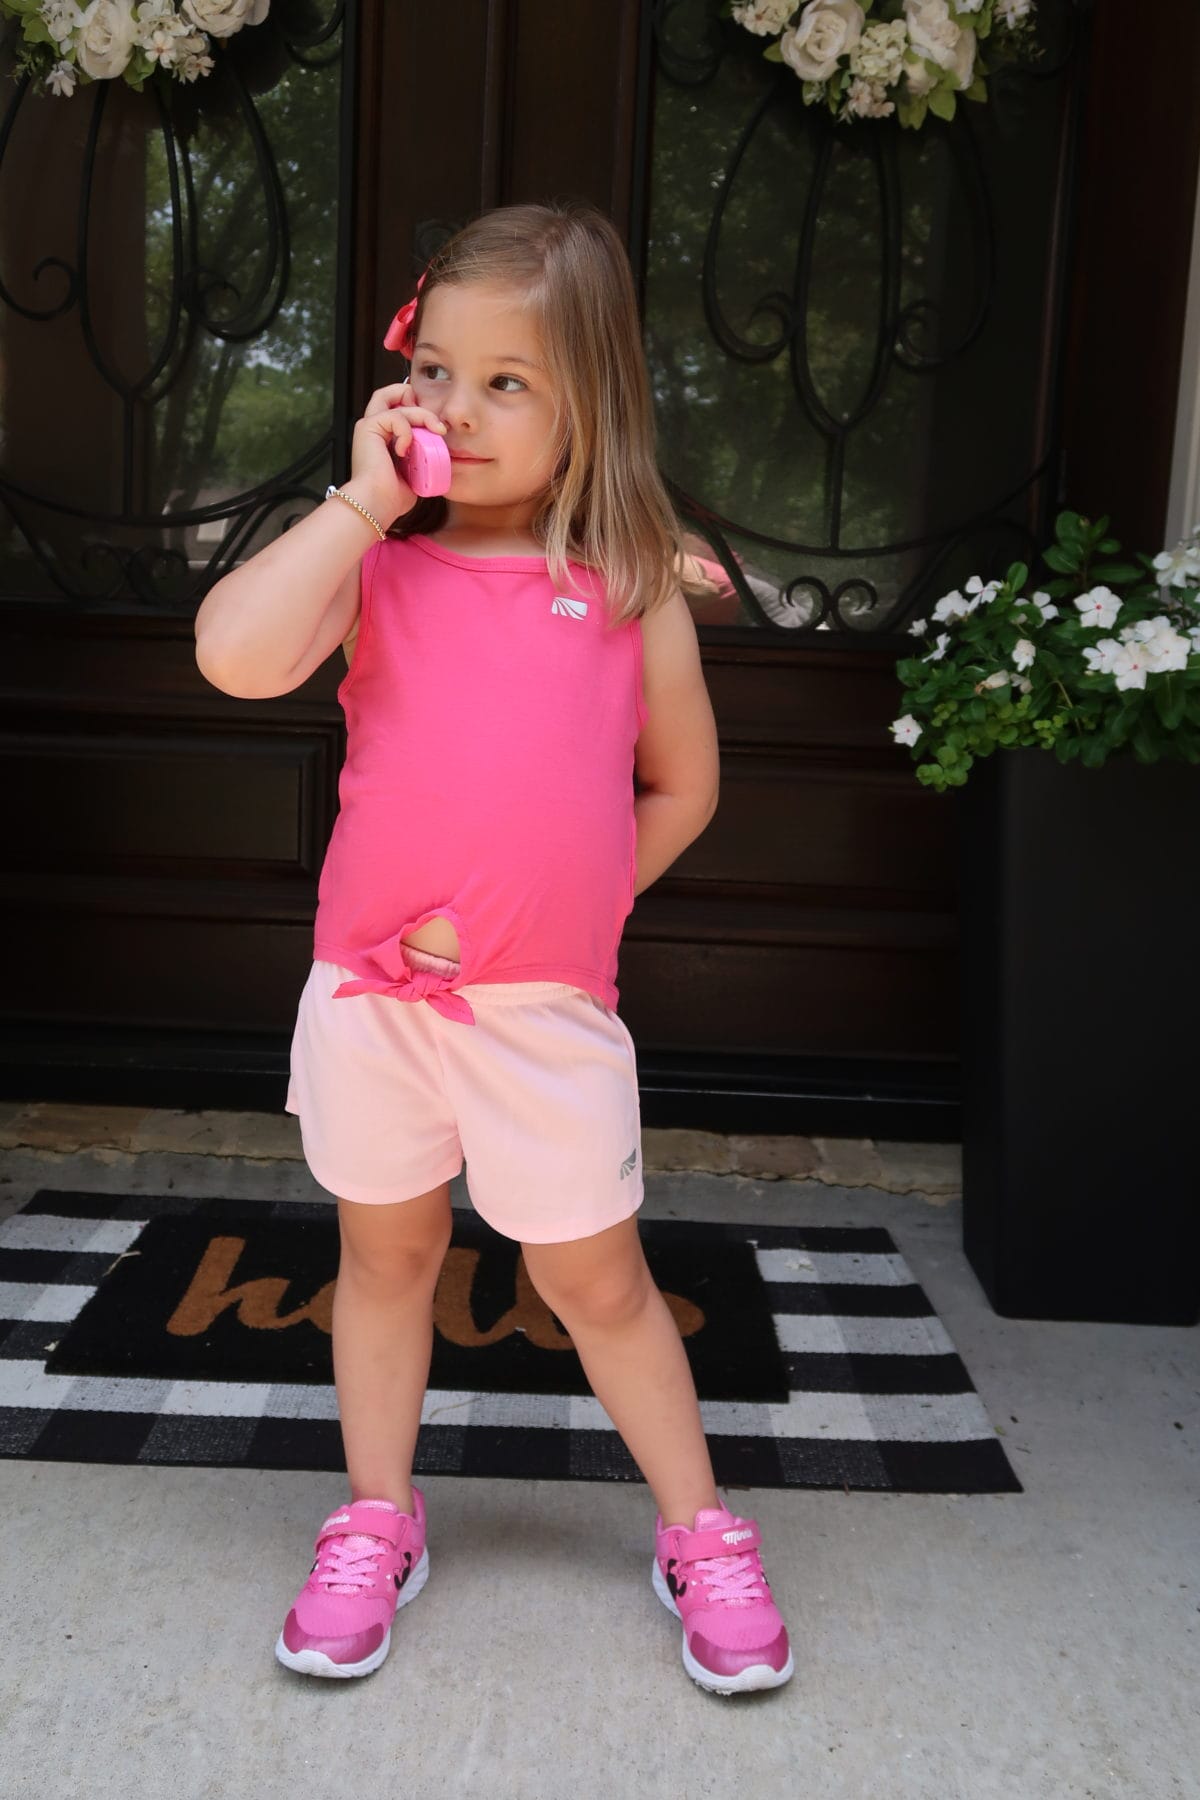 Walmart Girls Pink Athletic Top and Shorts, Minnie Mouse Sneakers